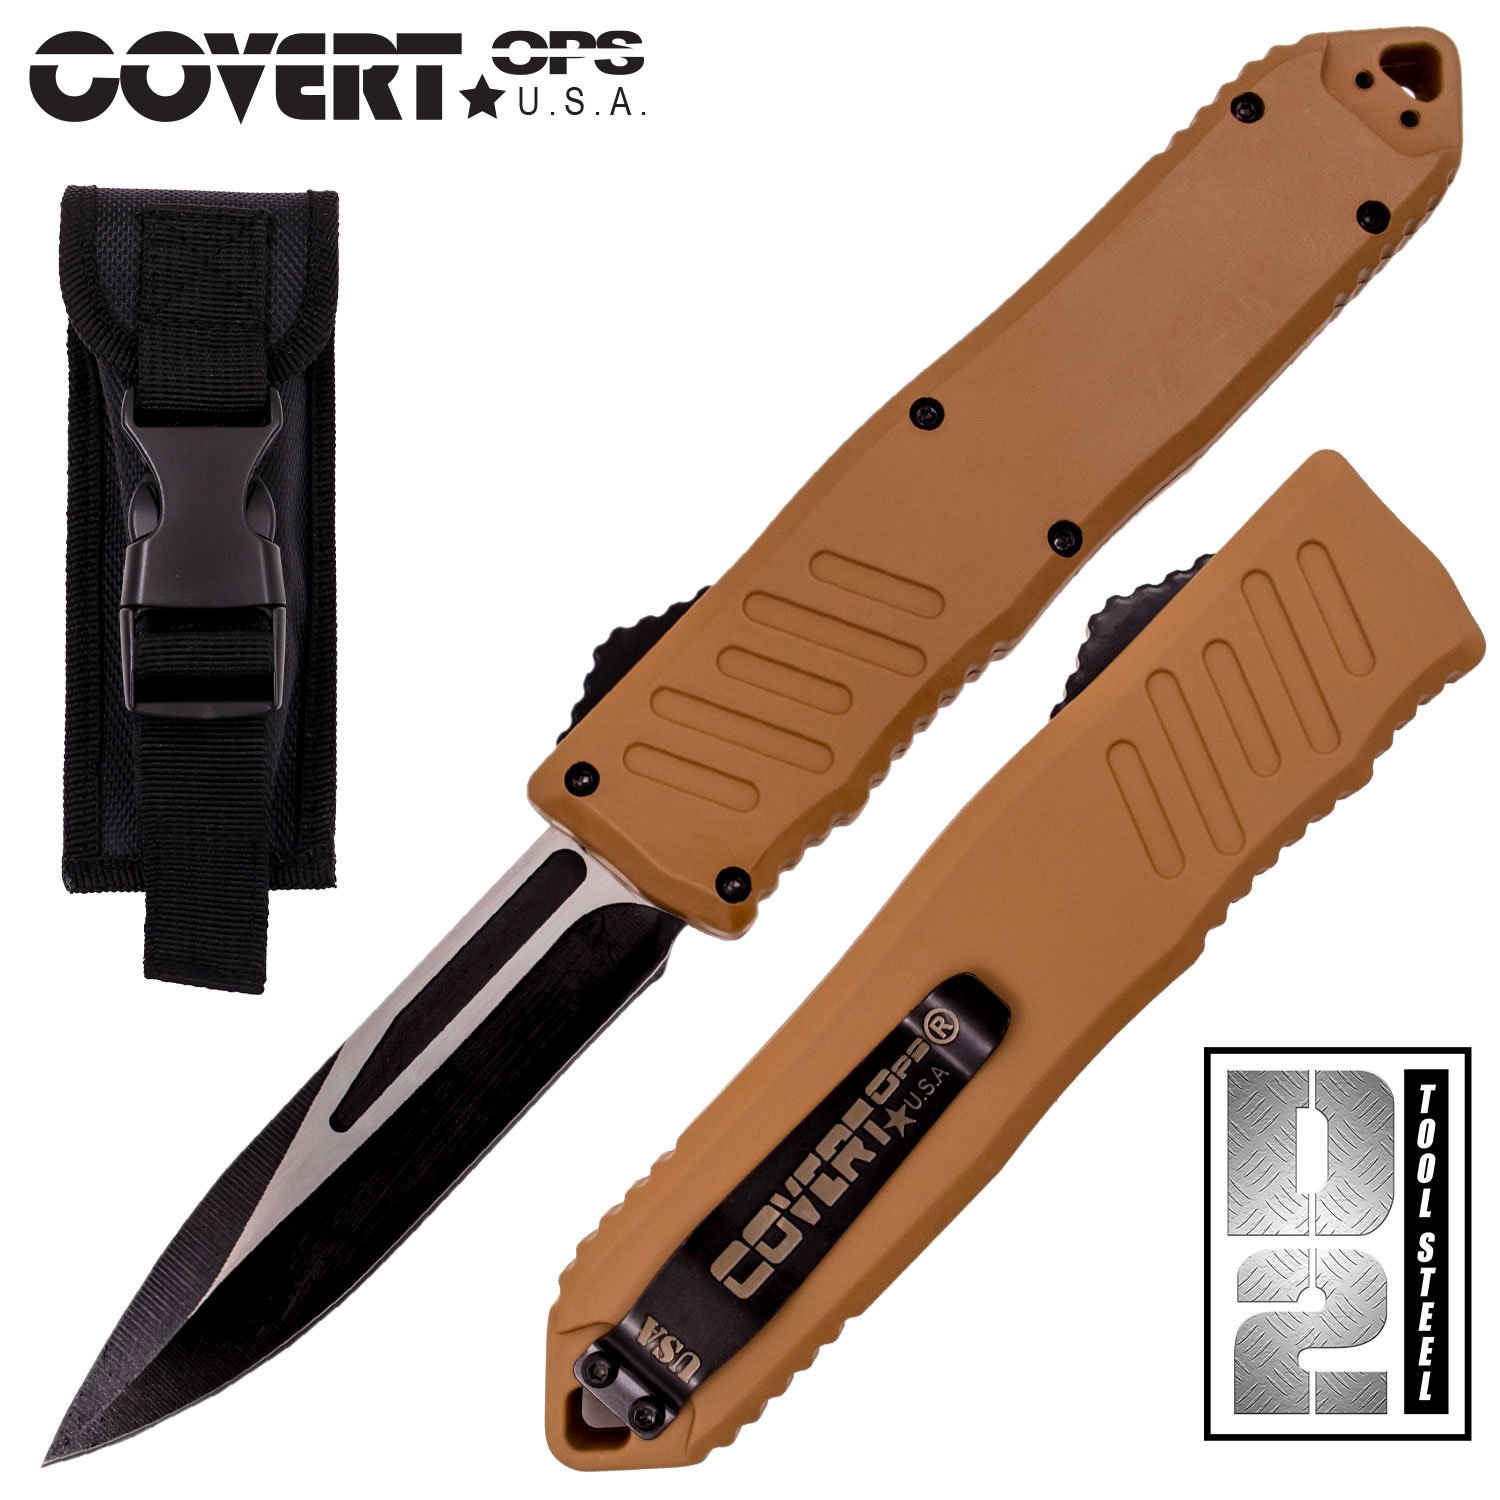 Covert OPS USA OTF Automatic Knife 9 inch Overall D2 Steel Blade Drop Pnt Tan